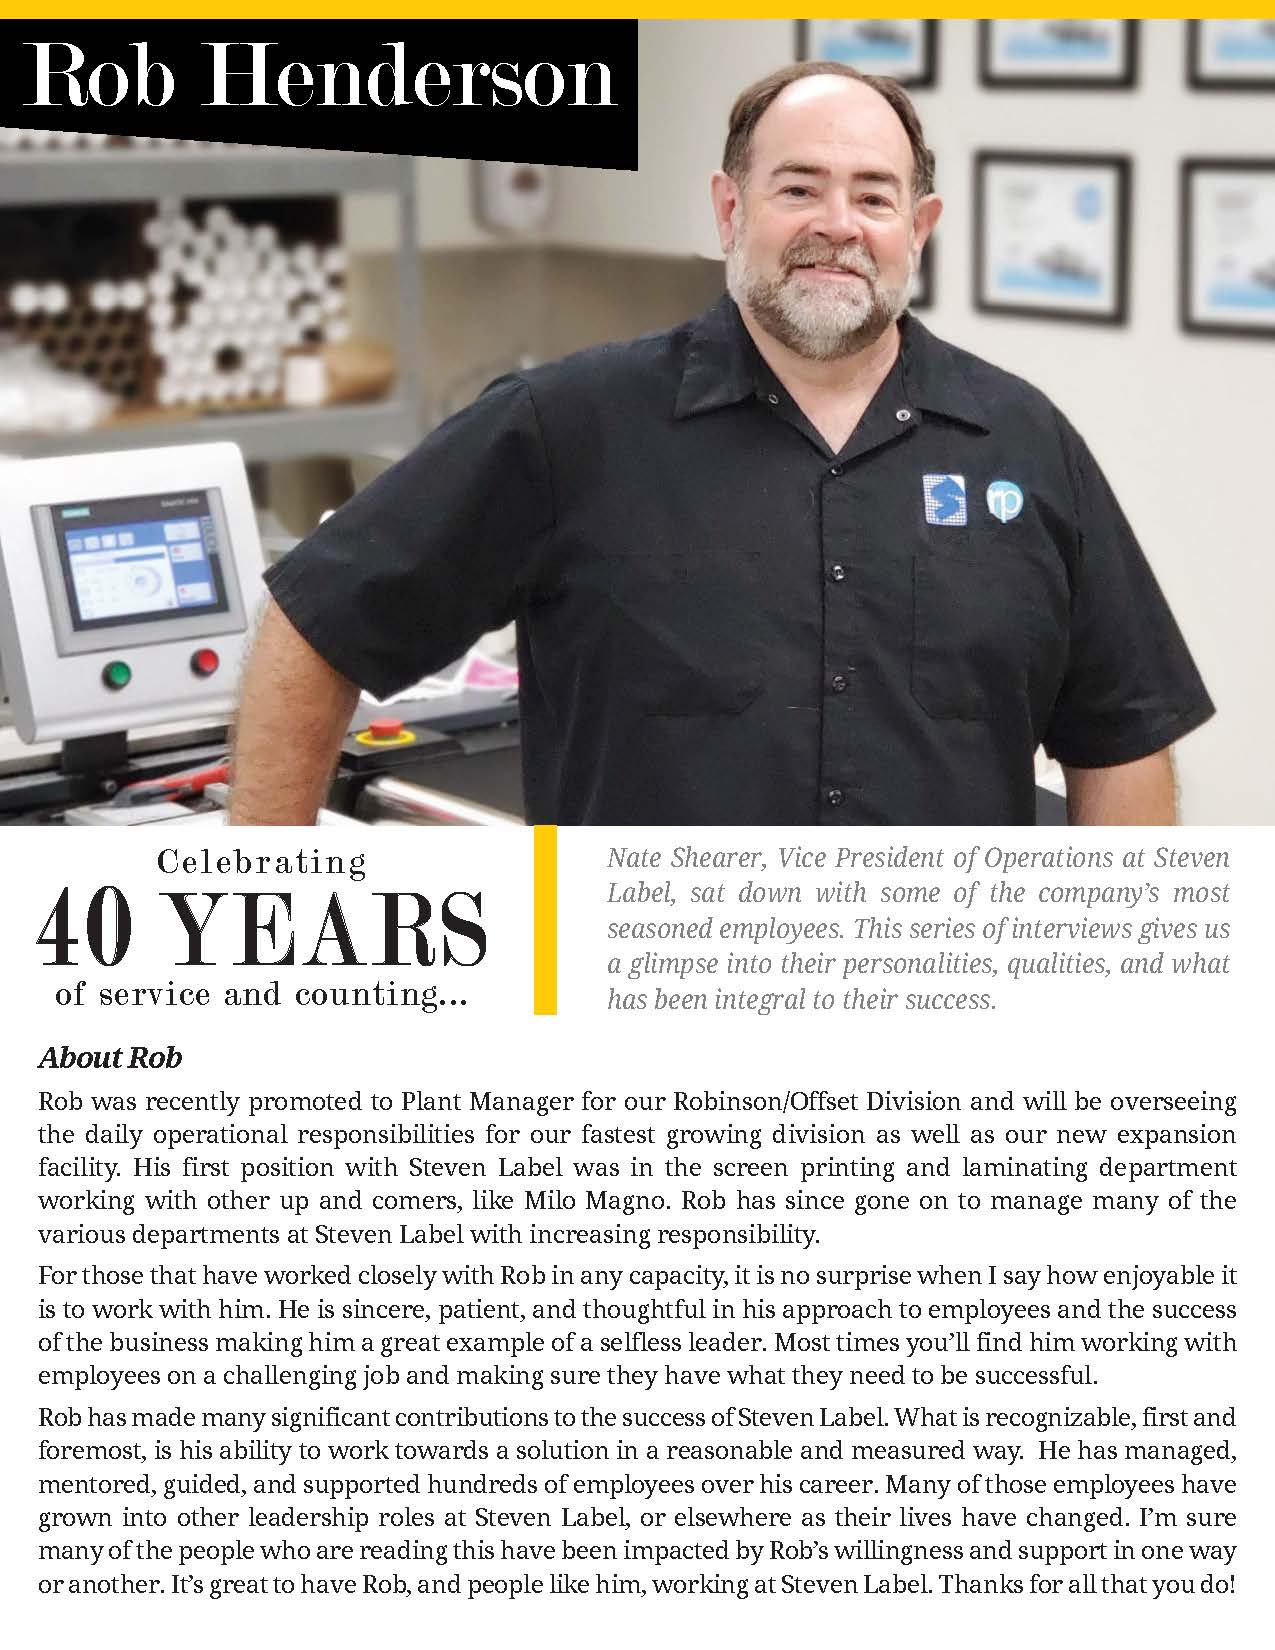 Rob Henderson celebrates 40-years with Steven Label & Robinson Printing!